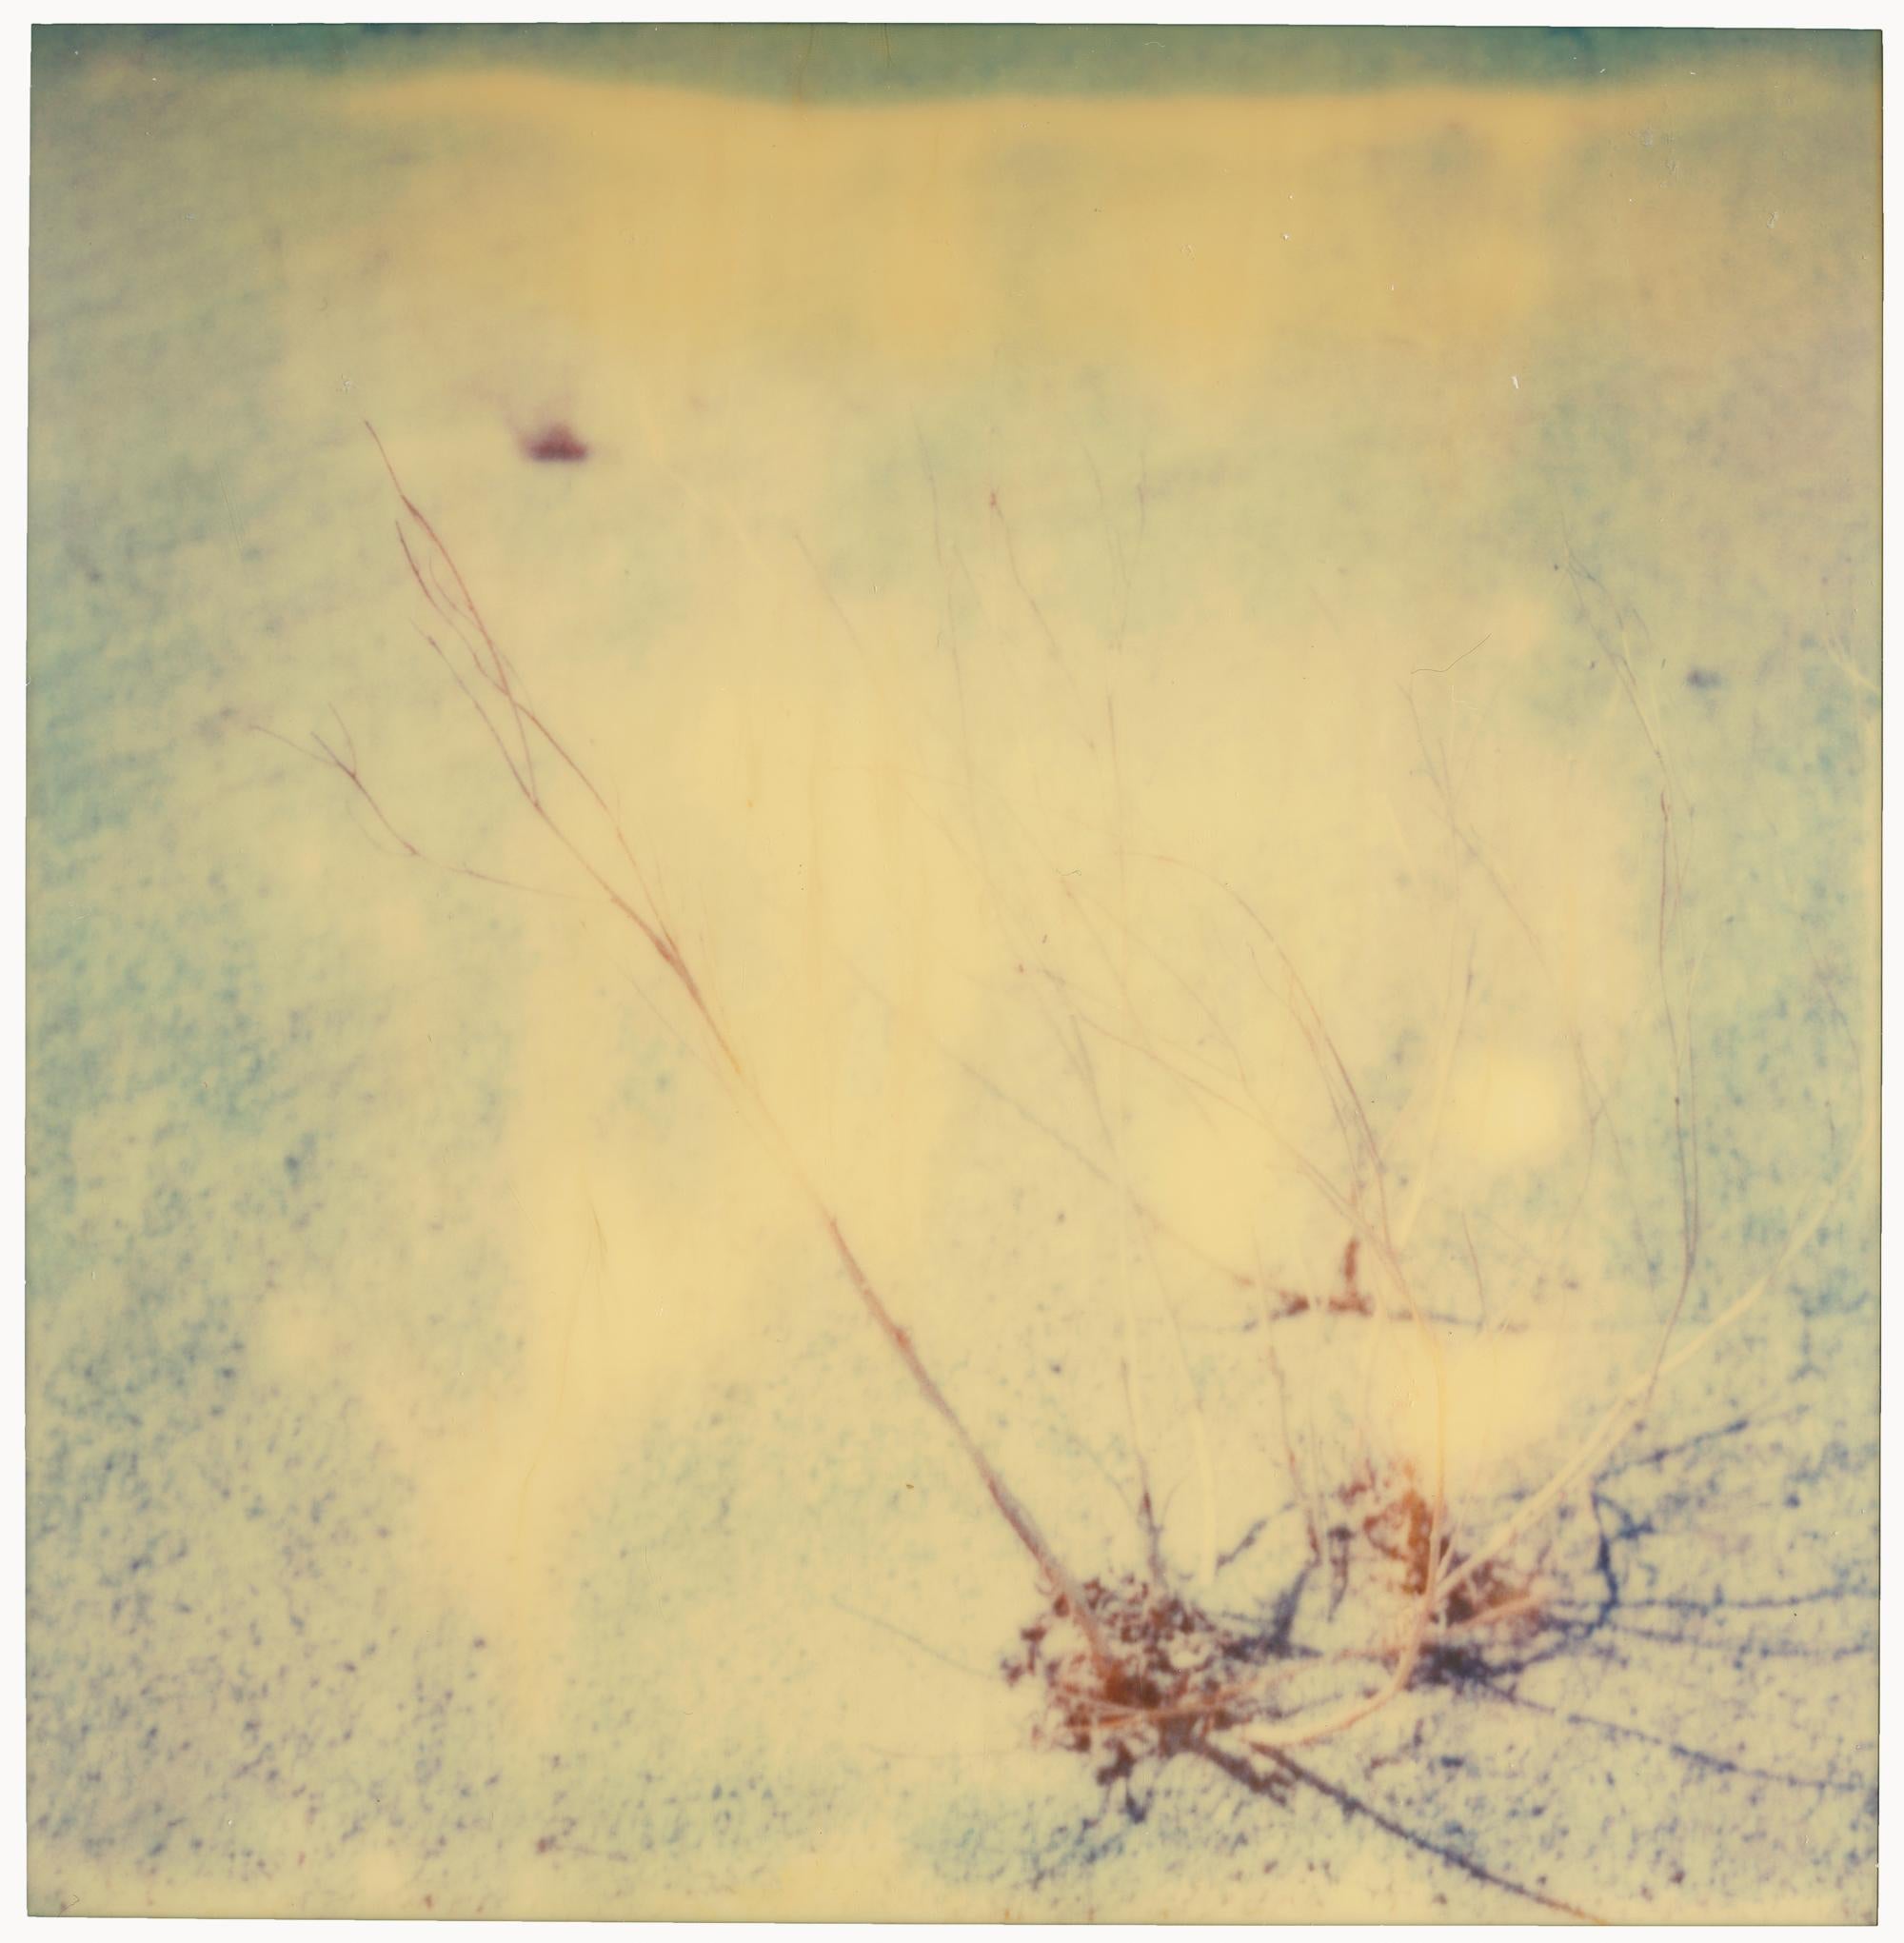 Stefanie Schneider Color Photograph - Flora - Planet of the Apes 08 - 21st Century, Polaroid, Abstract